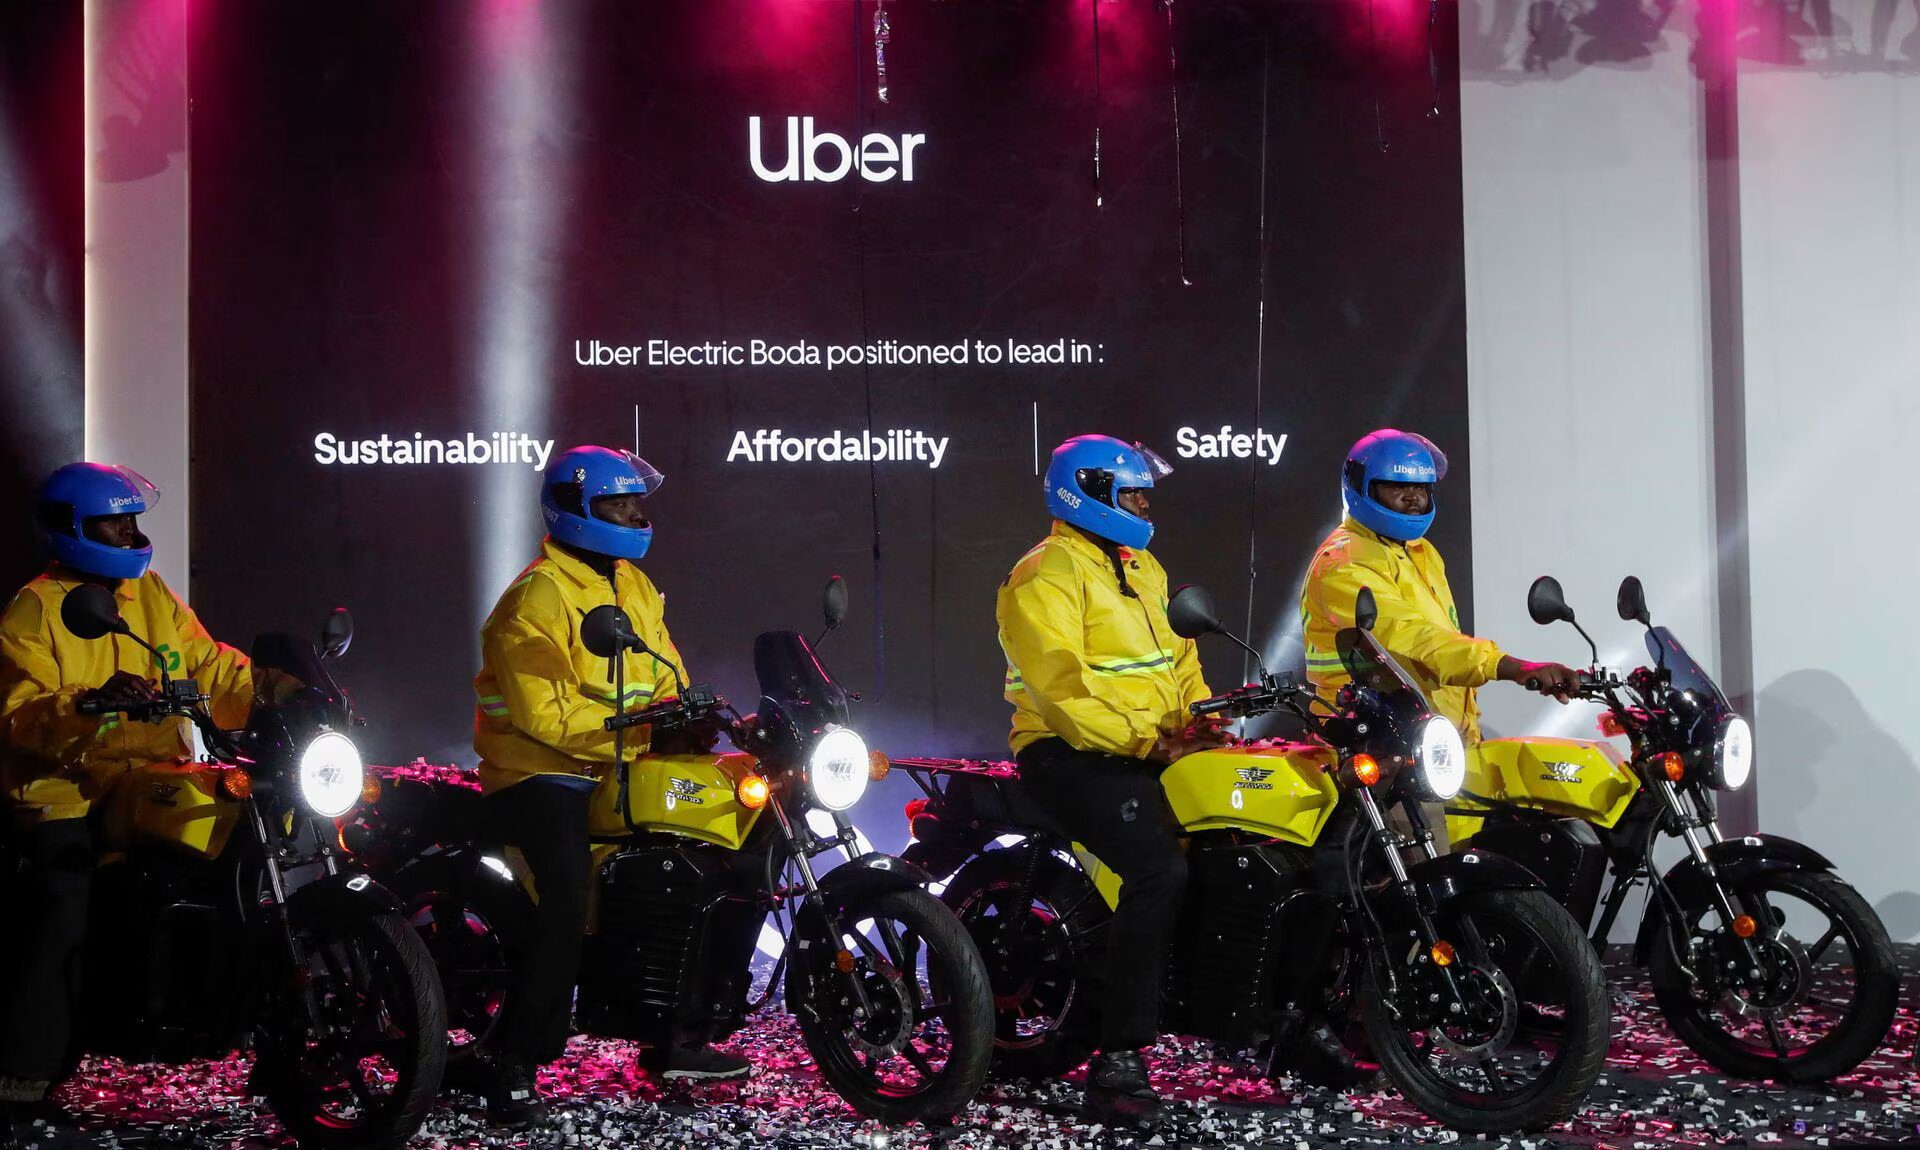 Launching "Electric Boda" in Kenya, Uber positions as e-hailing for the future